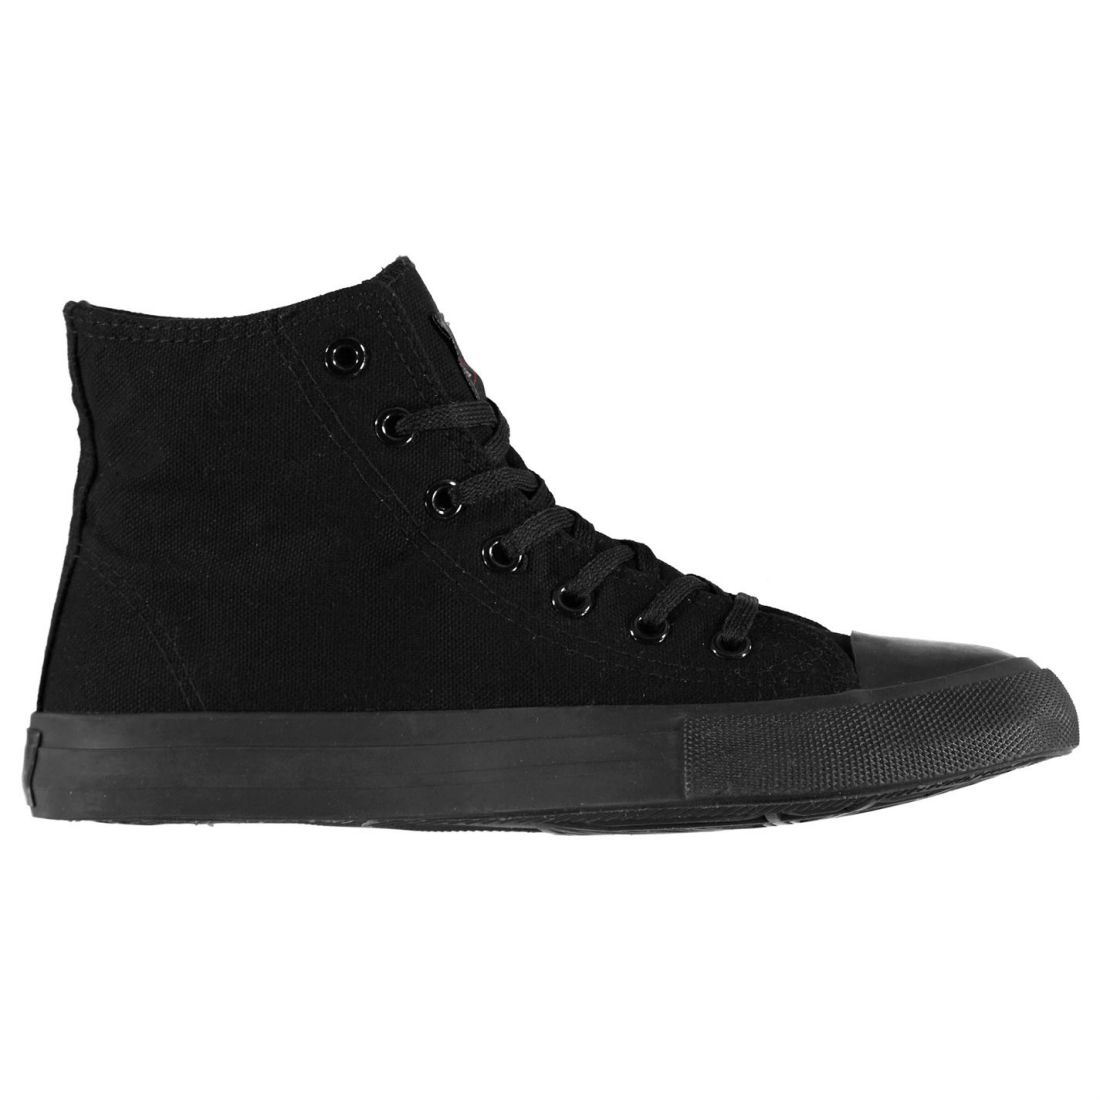 Lee Cooper Canvas Hi Top Shoes Mens Gents High Laces Fastened | eBay